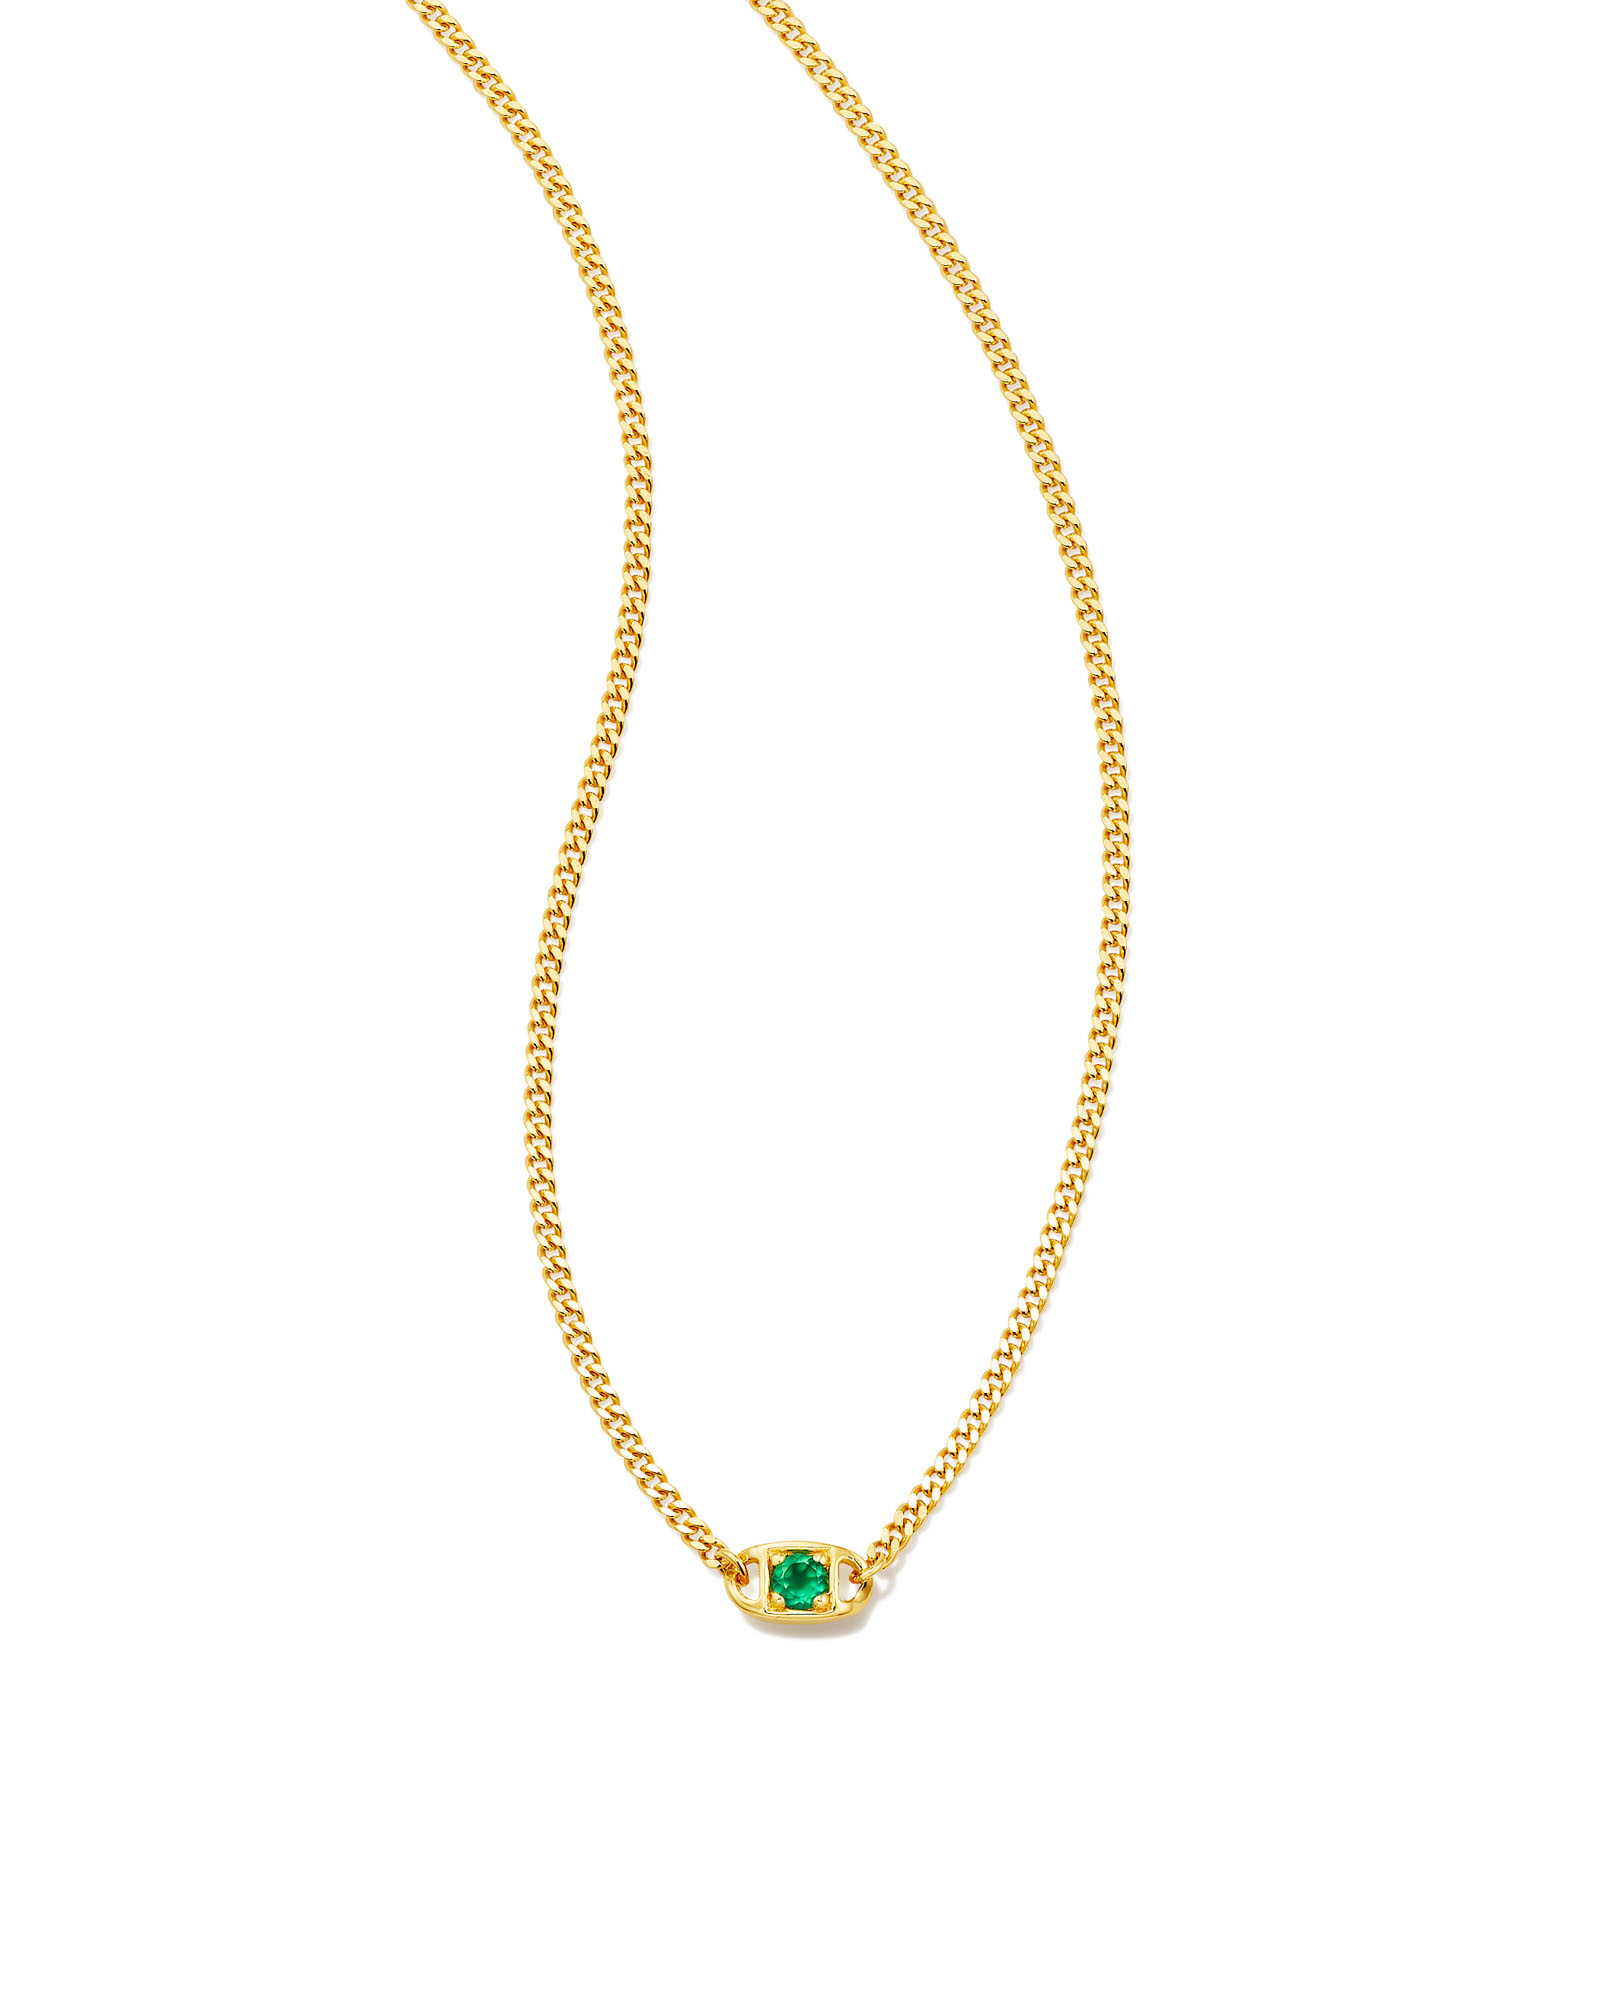 18 Inch Thin Chain Necklace in 18k Rose Gold Vermeil | Kendra Scott